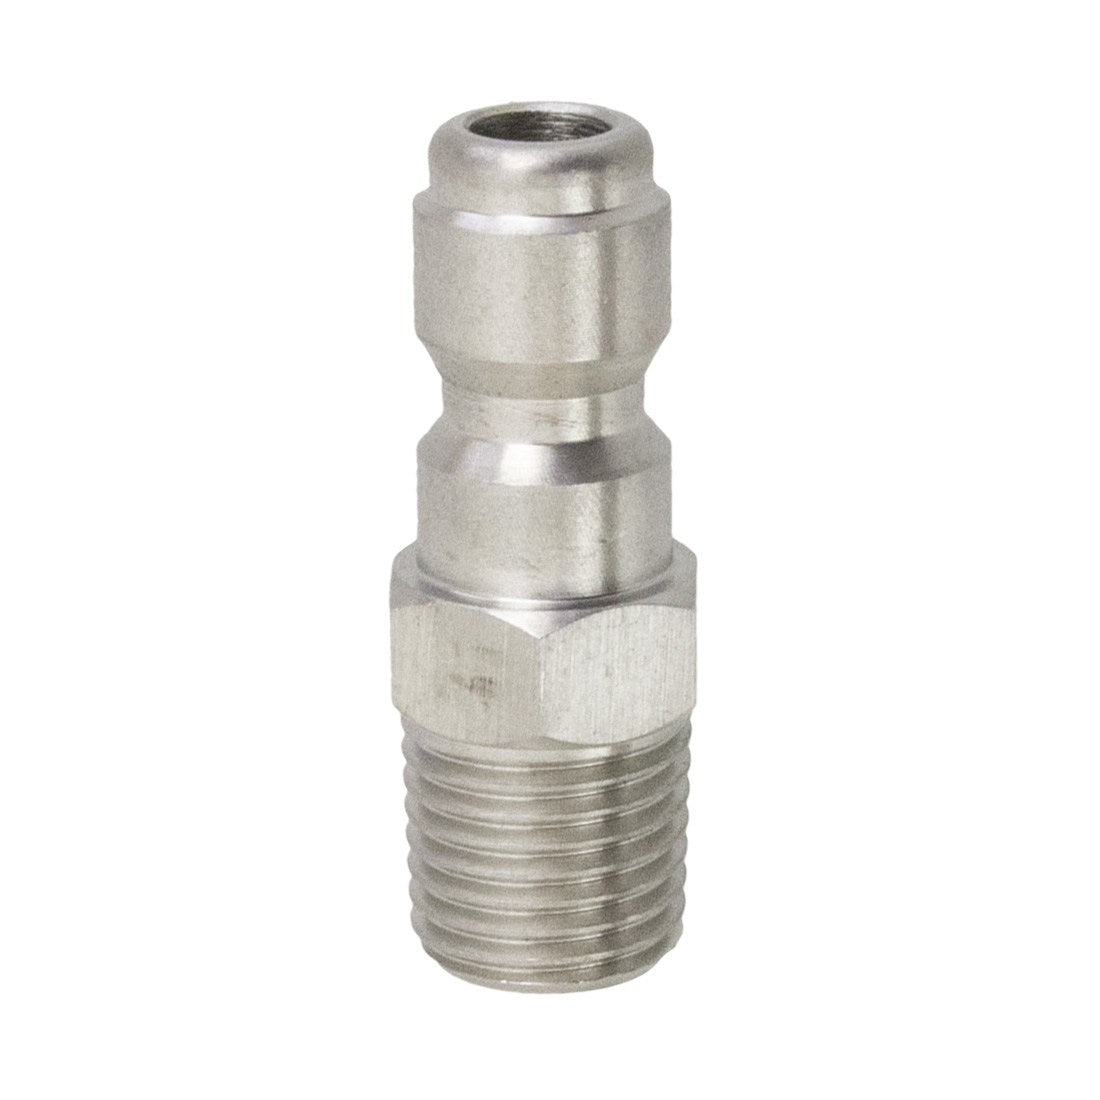 X-Jet Male Plug - 1/4 Inch - Top Angle Front View